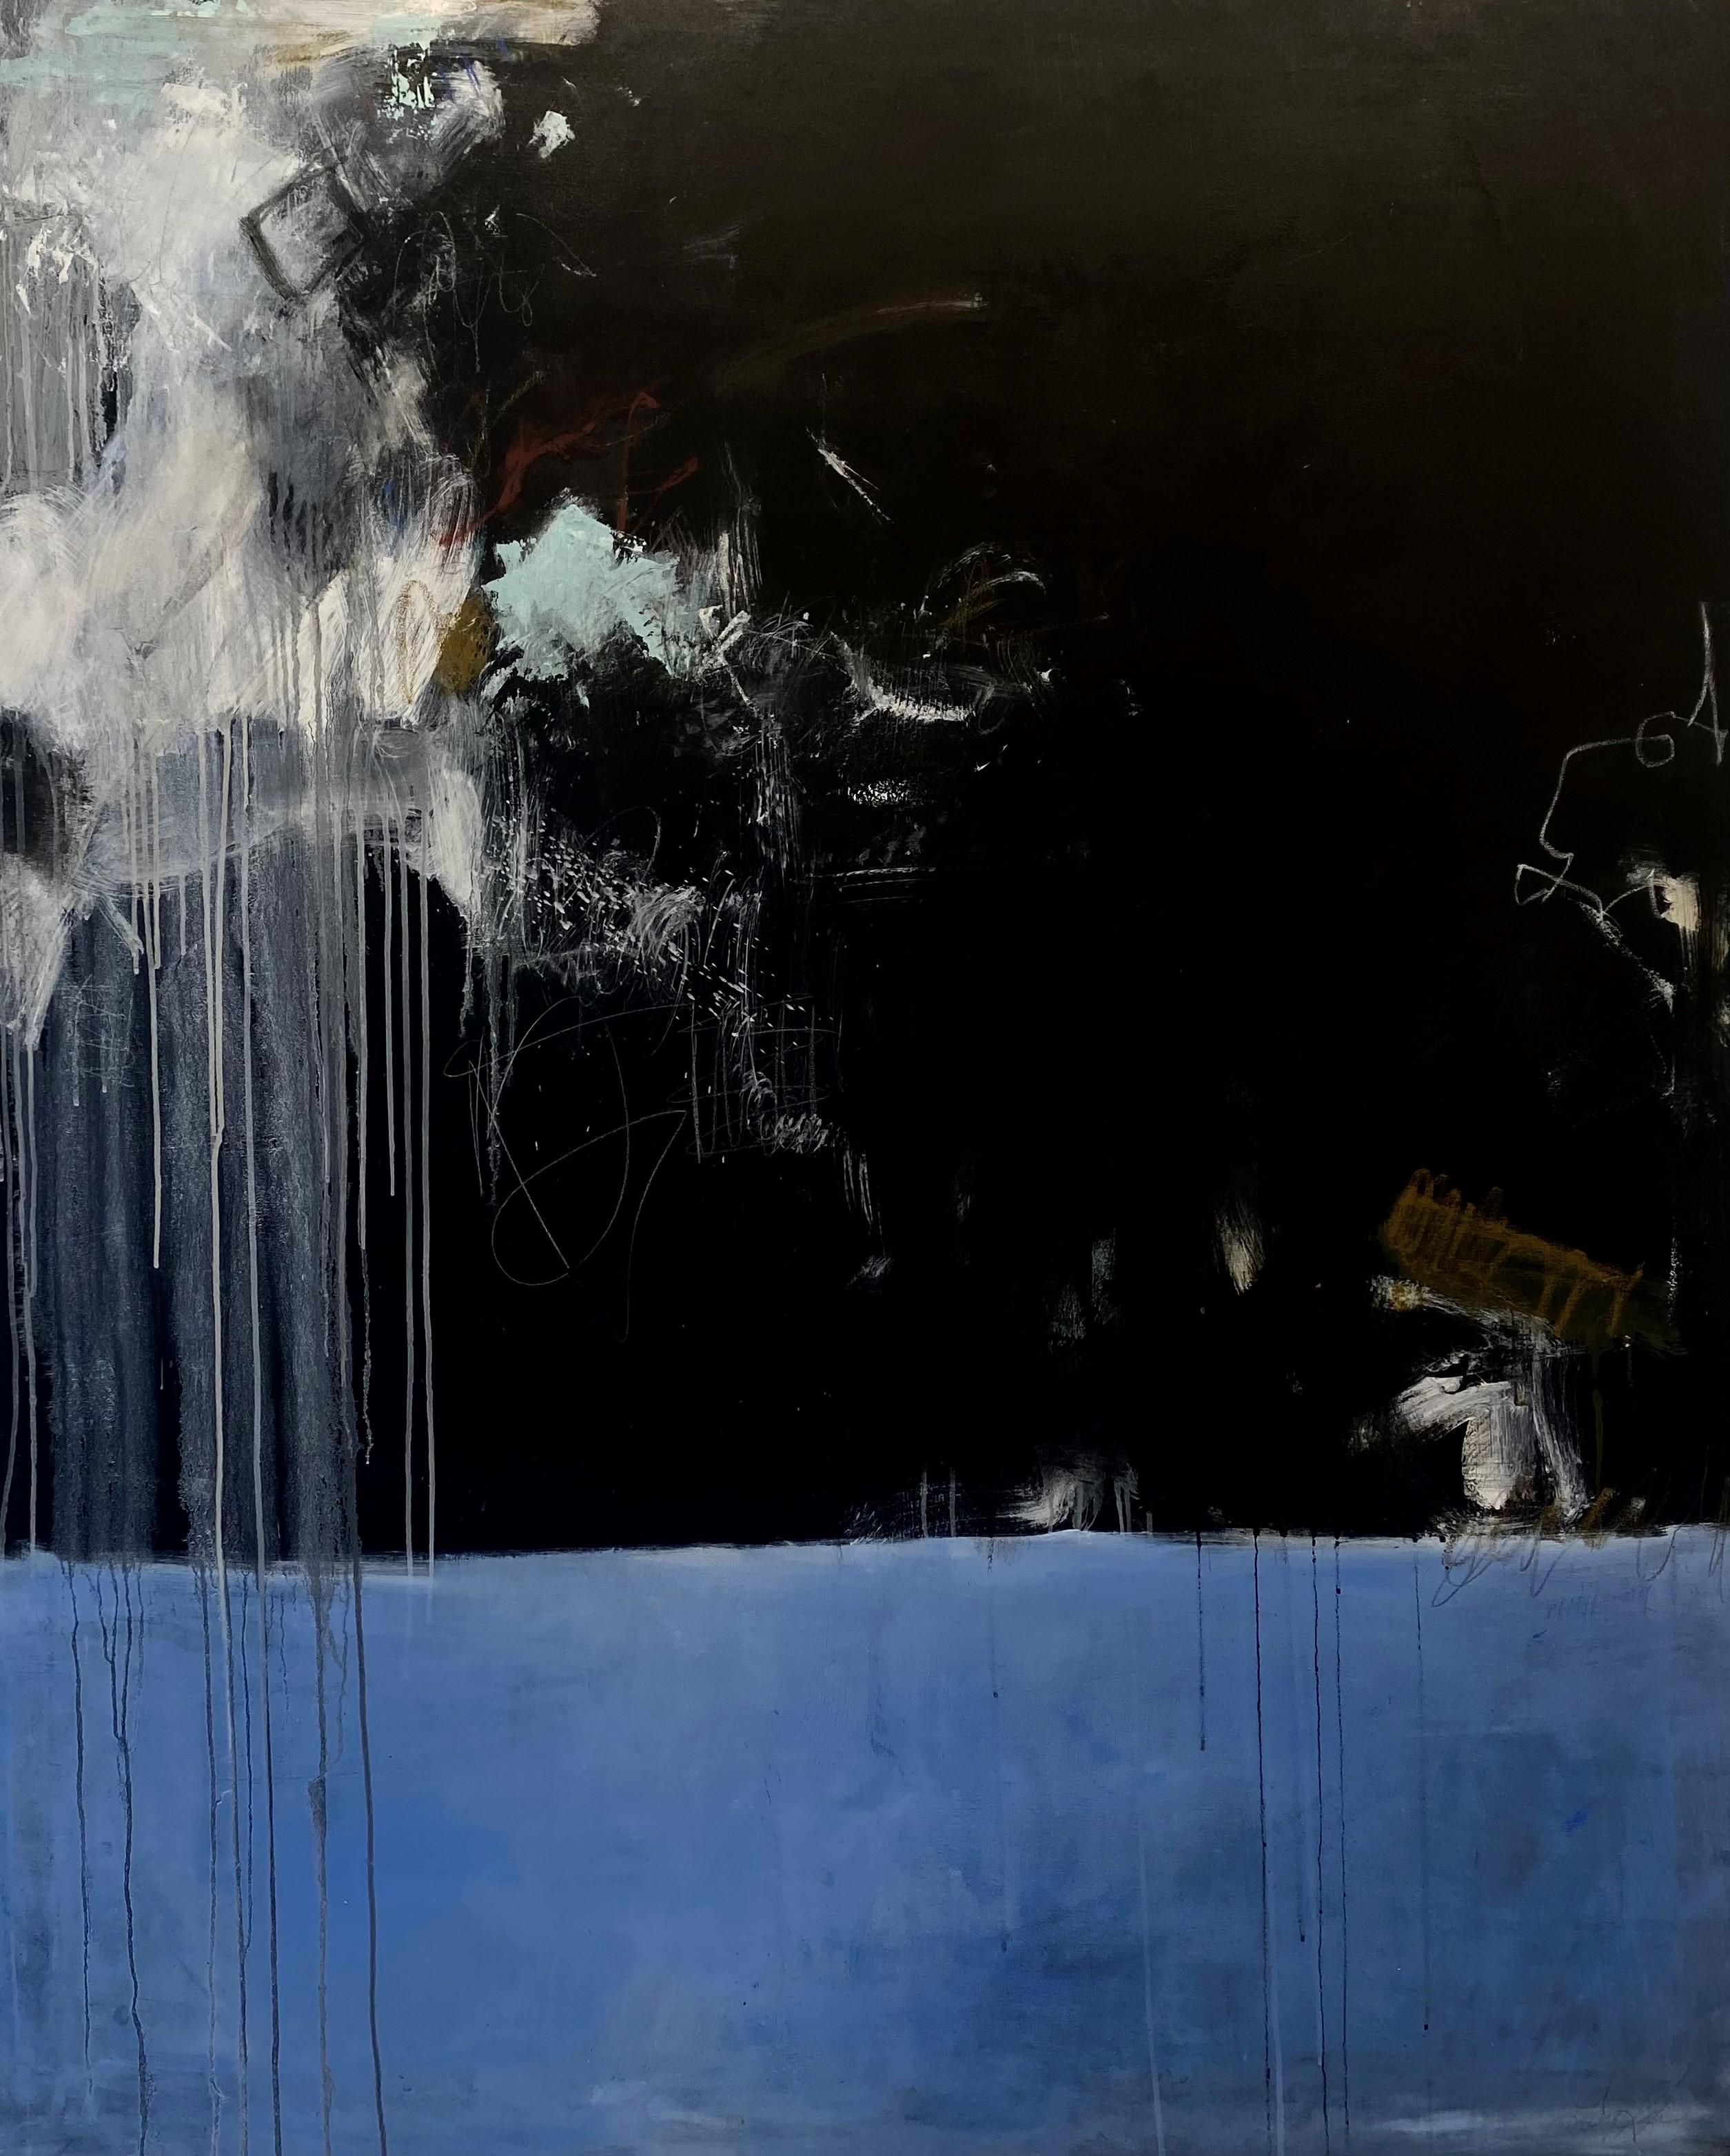 Lily Harrington - Full of Life by Lily Harrington, Large Black Abstract  Painting on Canvas For Sale at 1stDibs